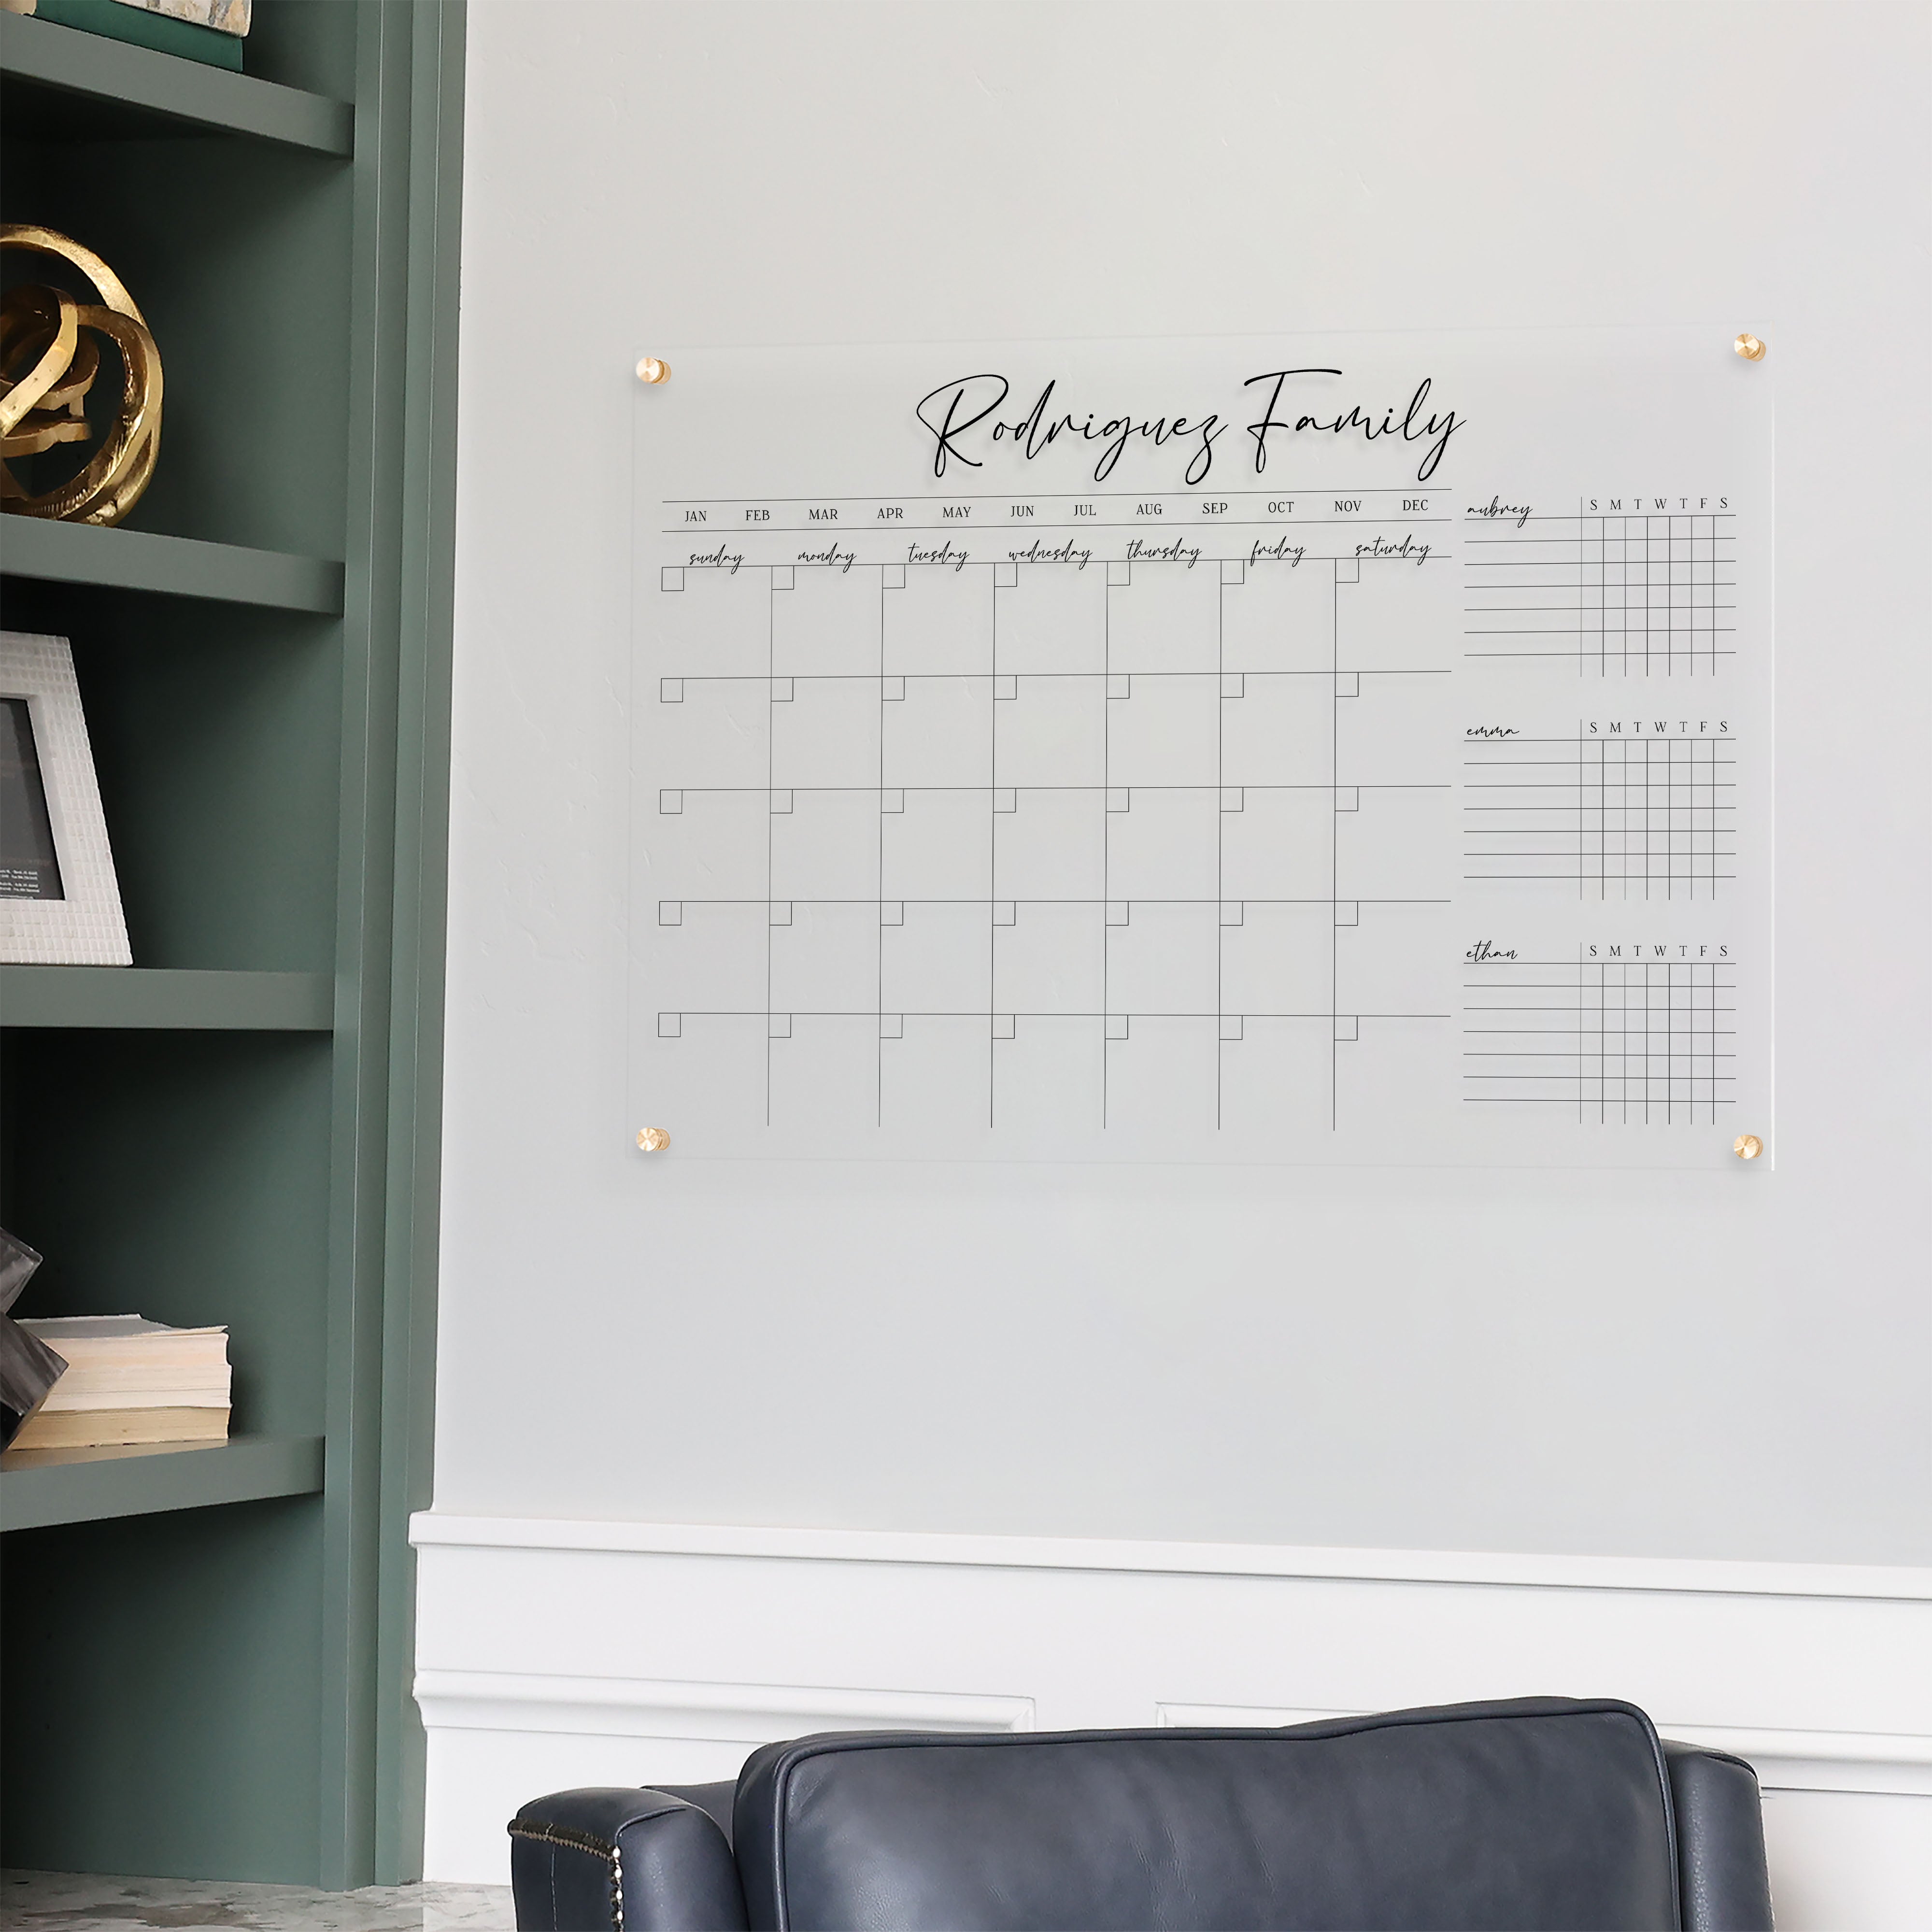 A dry-erase board with a month calendar and chore chart on it